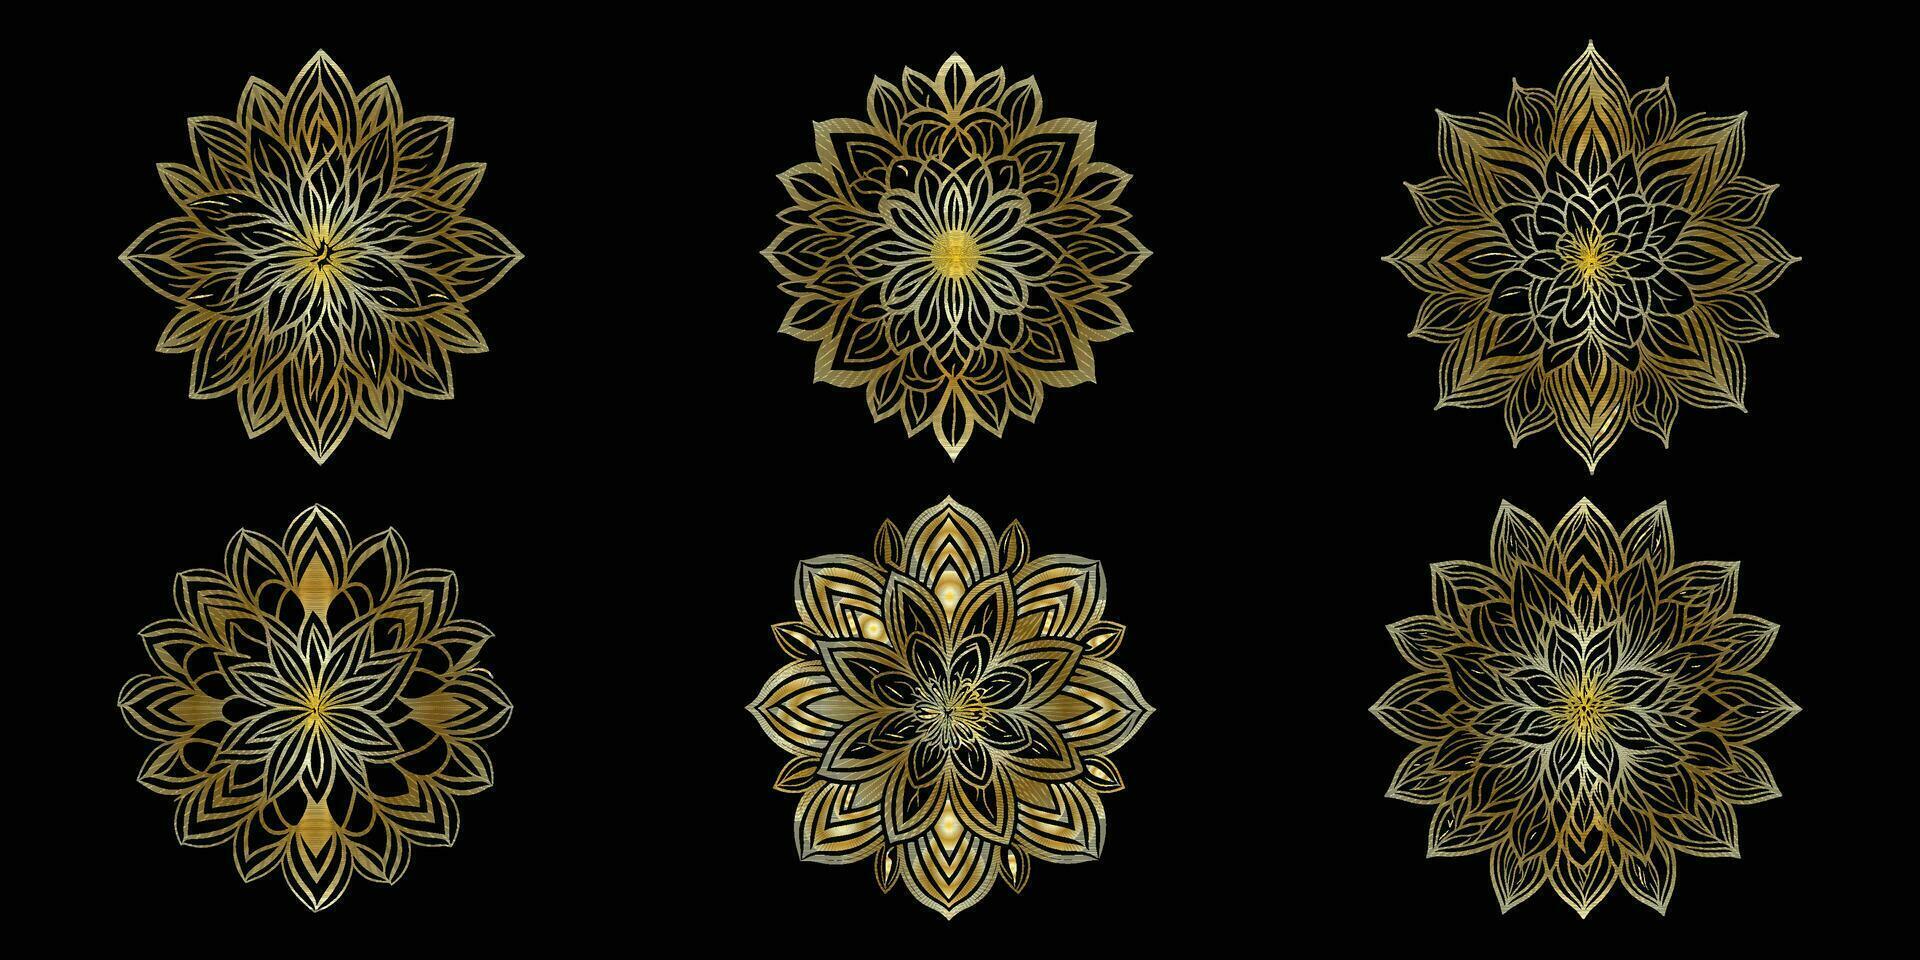 Golden Geometrical Flowers Vector Outline Isolated On White Background. Golden Floral Design